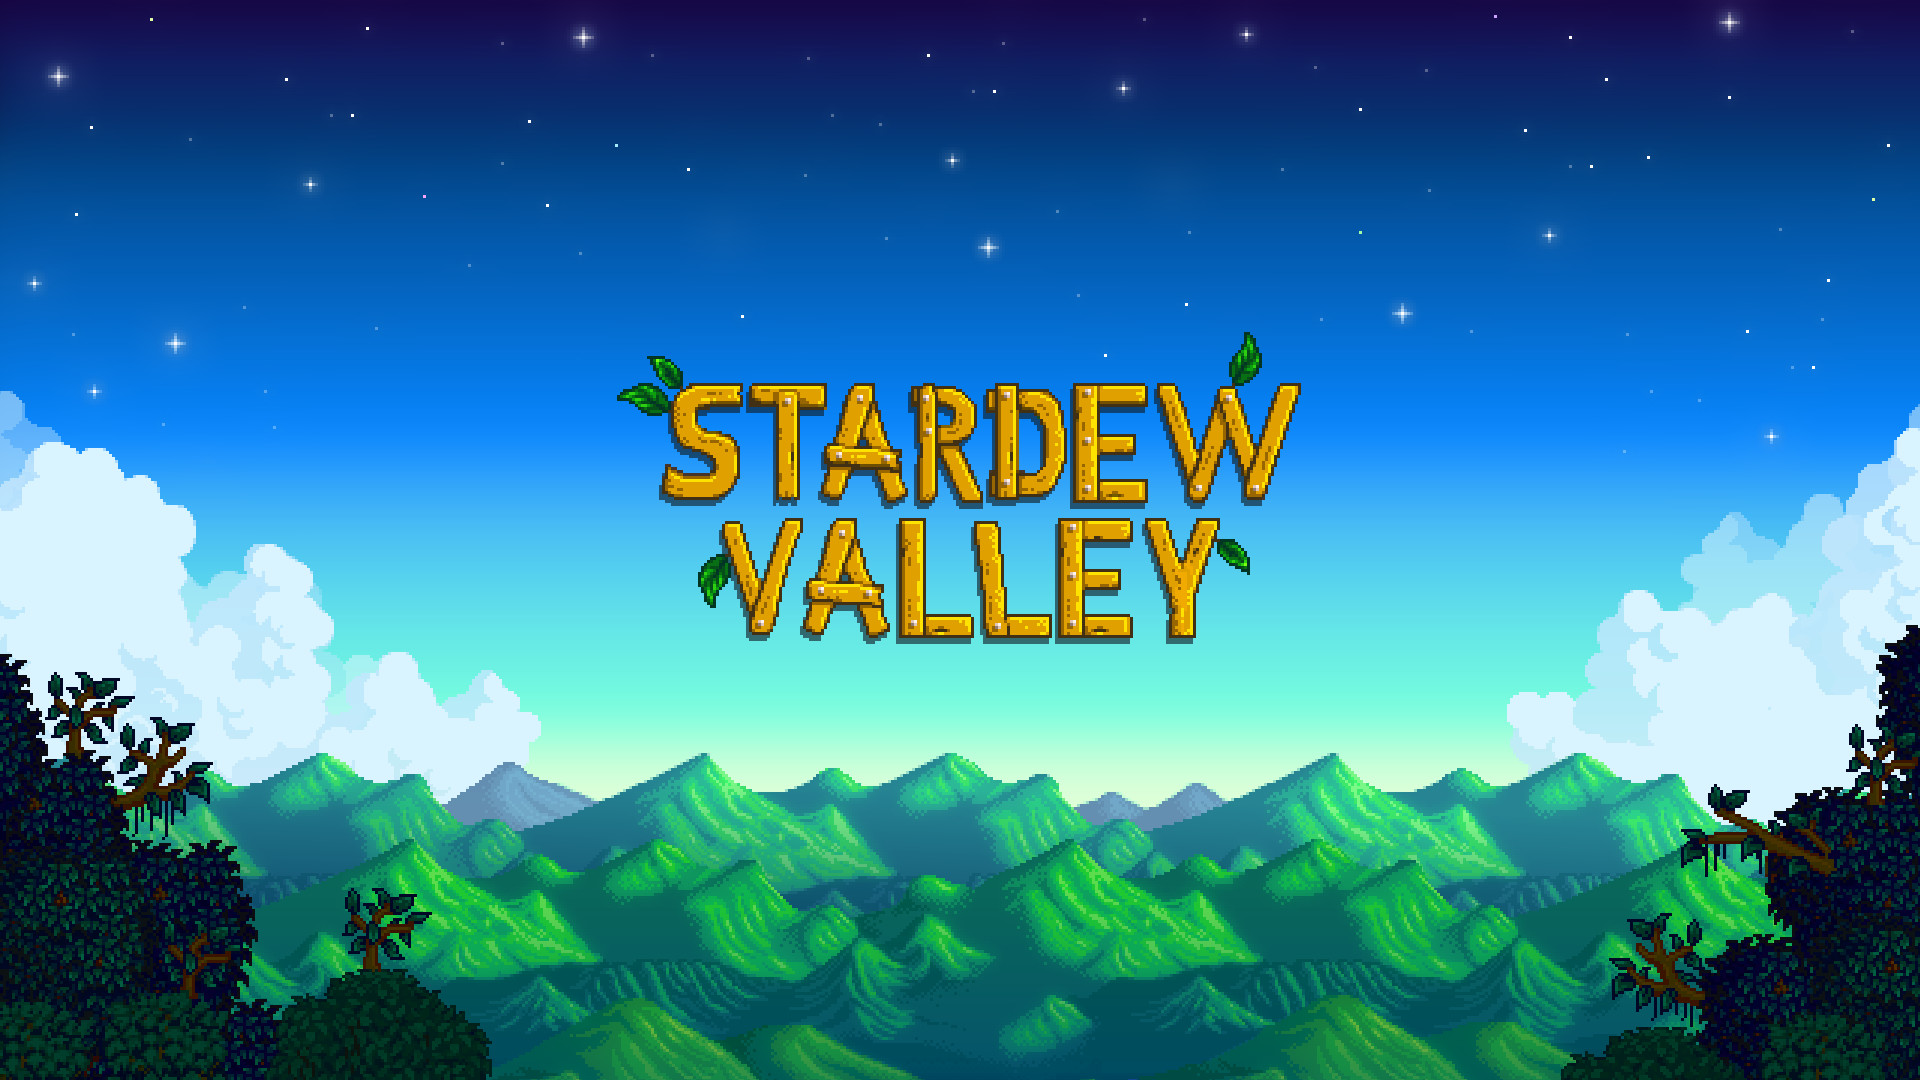 1920x1080 8 Reasons Why Stardew Valley is Better Than Harvest Moon – The Koalition